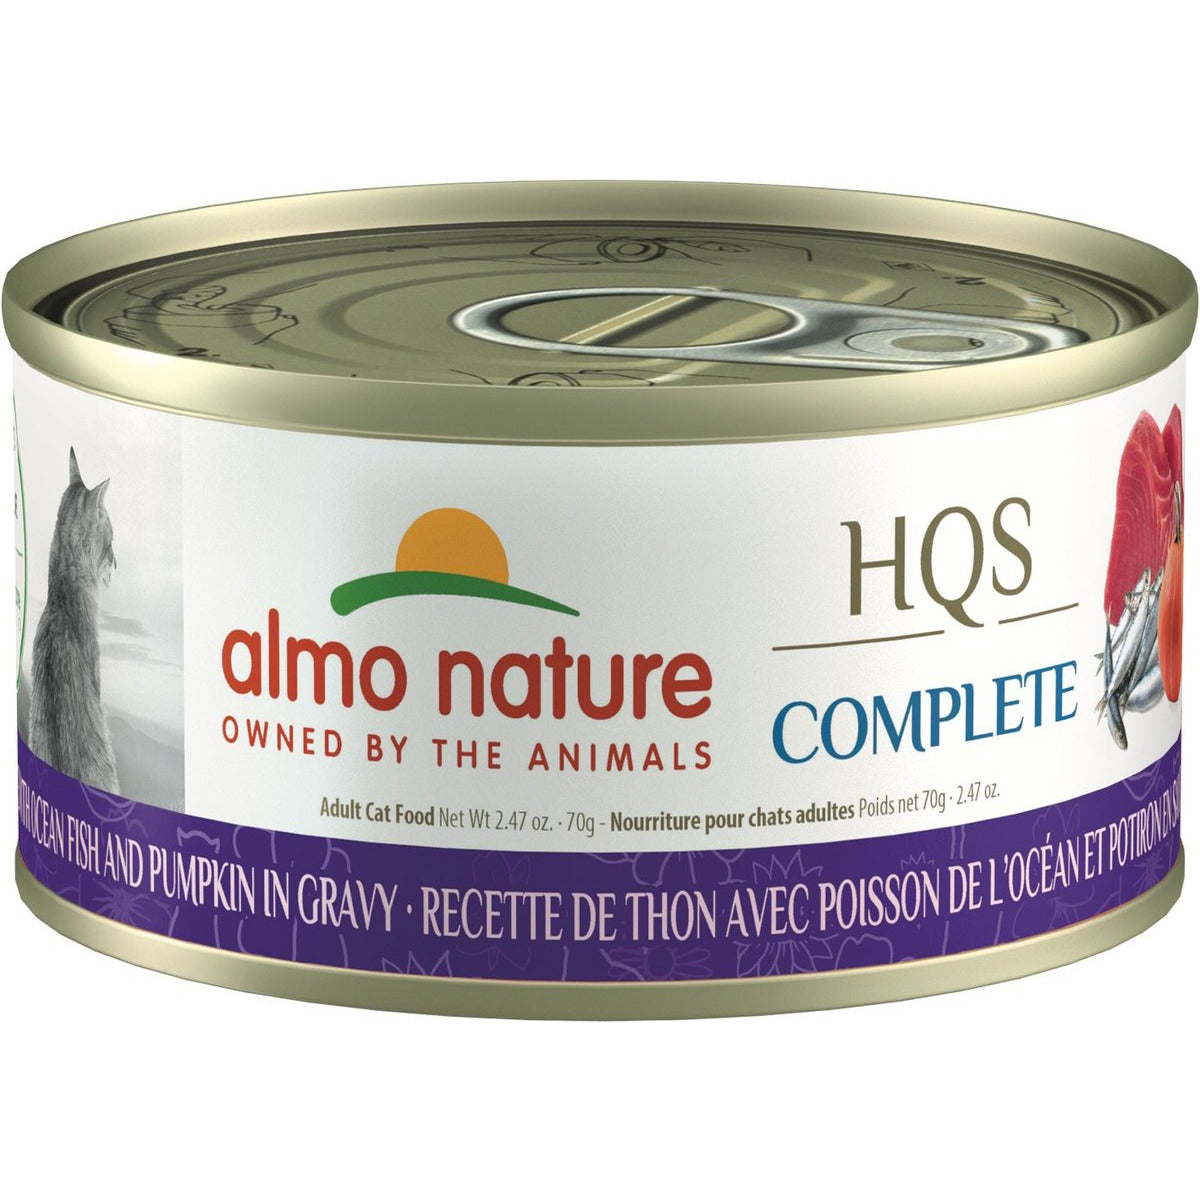 Almo Nature Complete Tuna Recipe With Ocean Fish and Pumpkin in Gravy  Canned Cat Food  | PetMax Canada